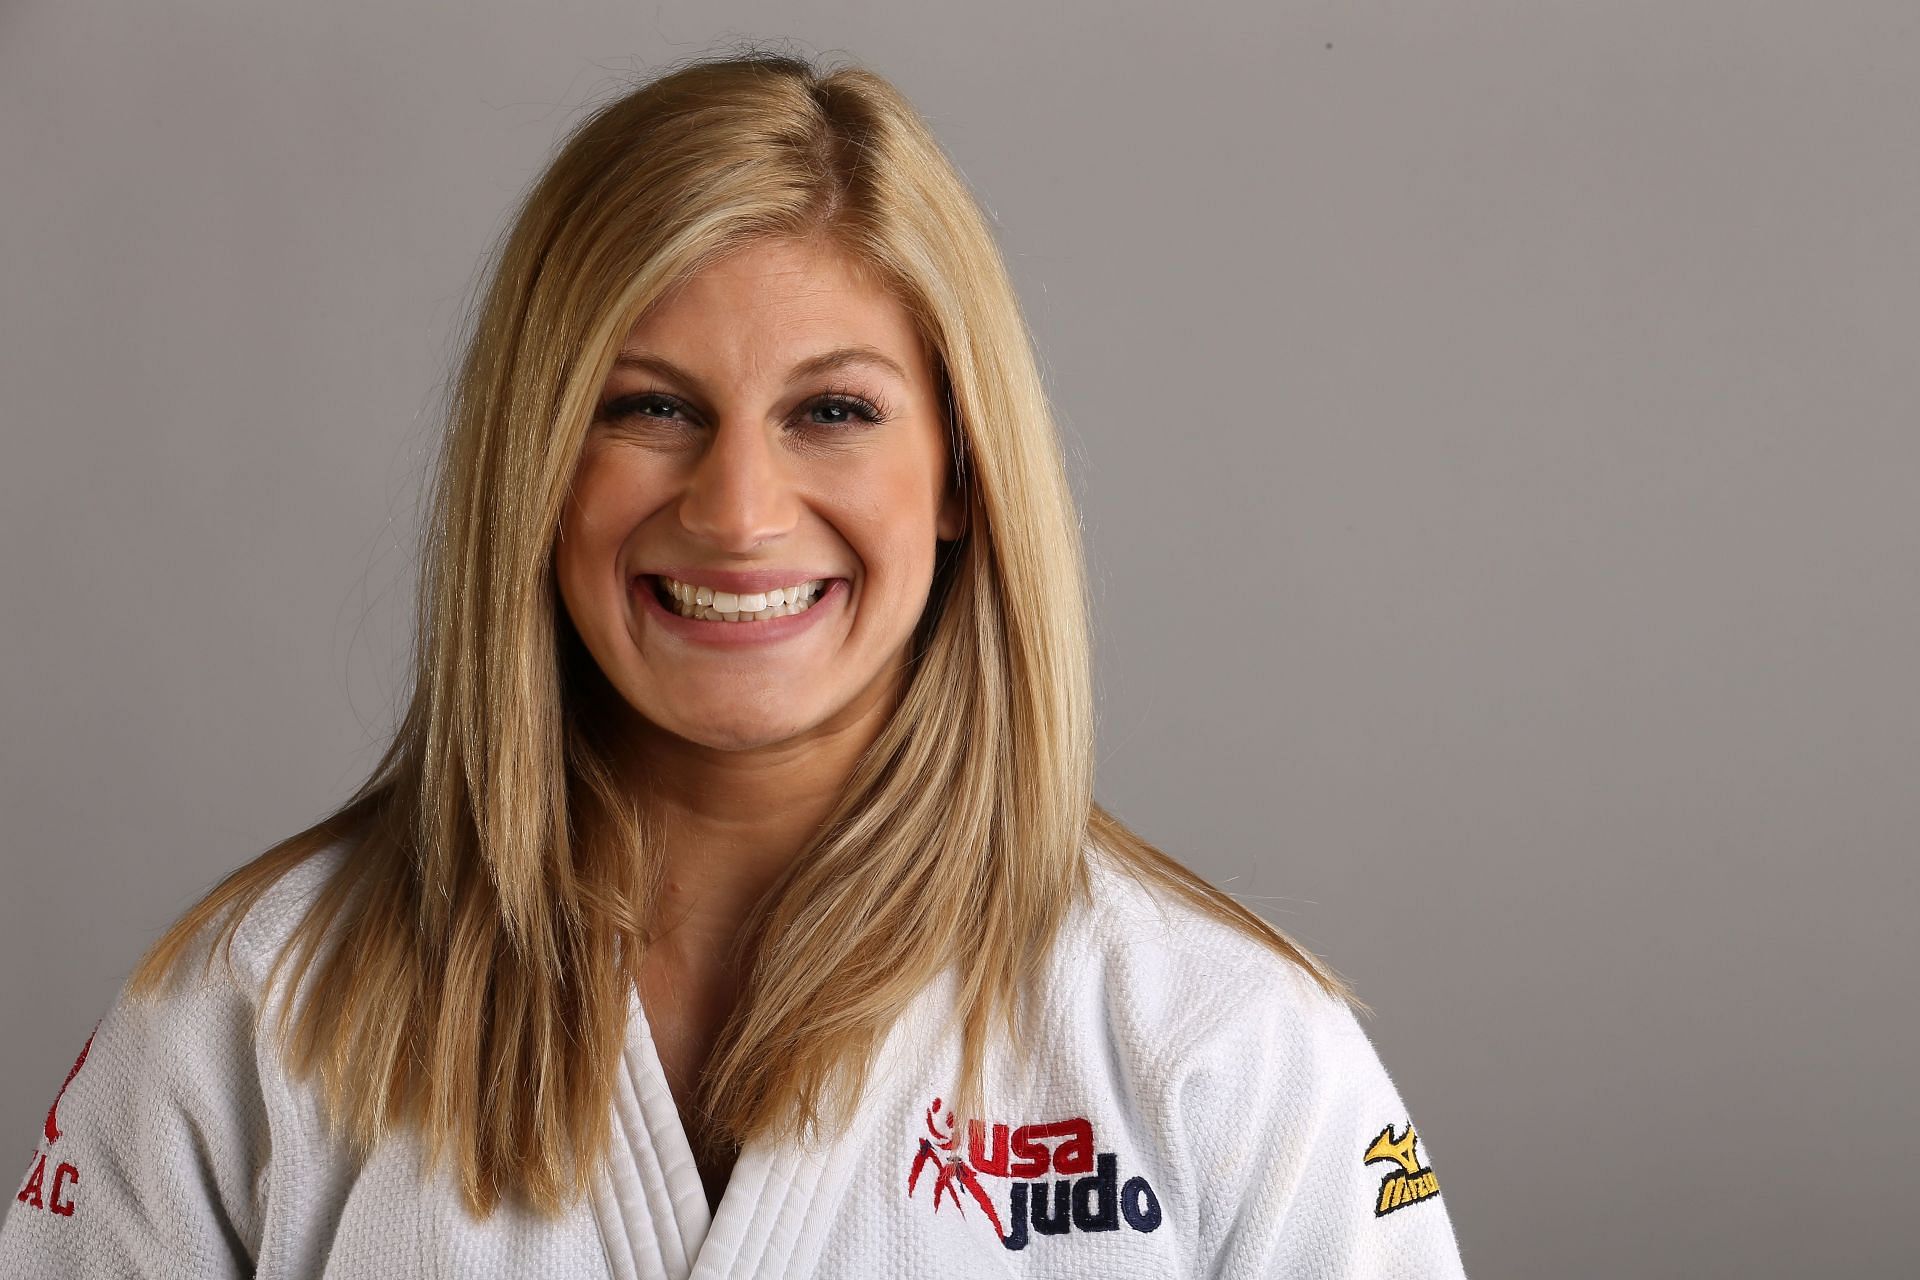 Kayla Harrison has a professional record of 12-0